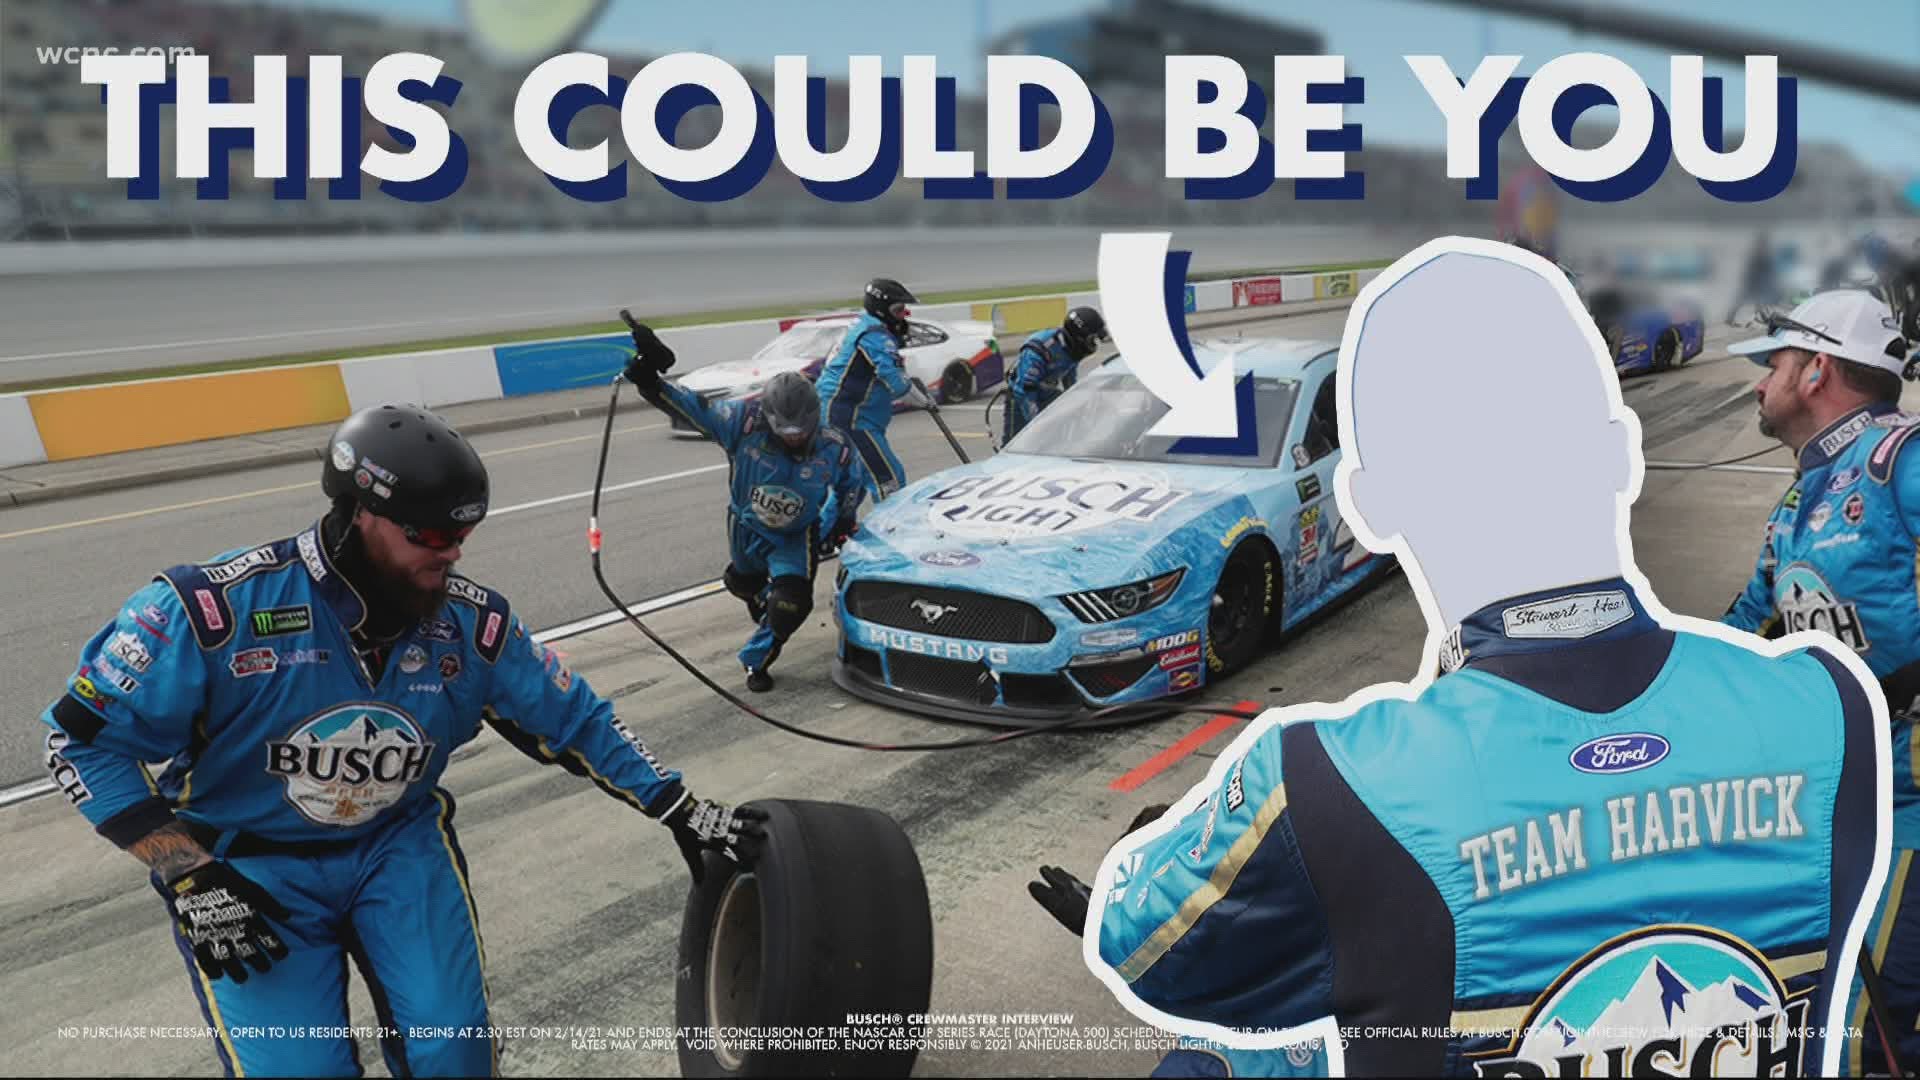 To celebrate the return of NASCAR, Busch, the official beer of the sport, is giving one fan a neat opportunity.